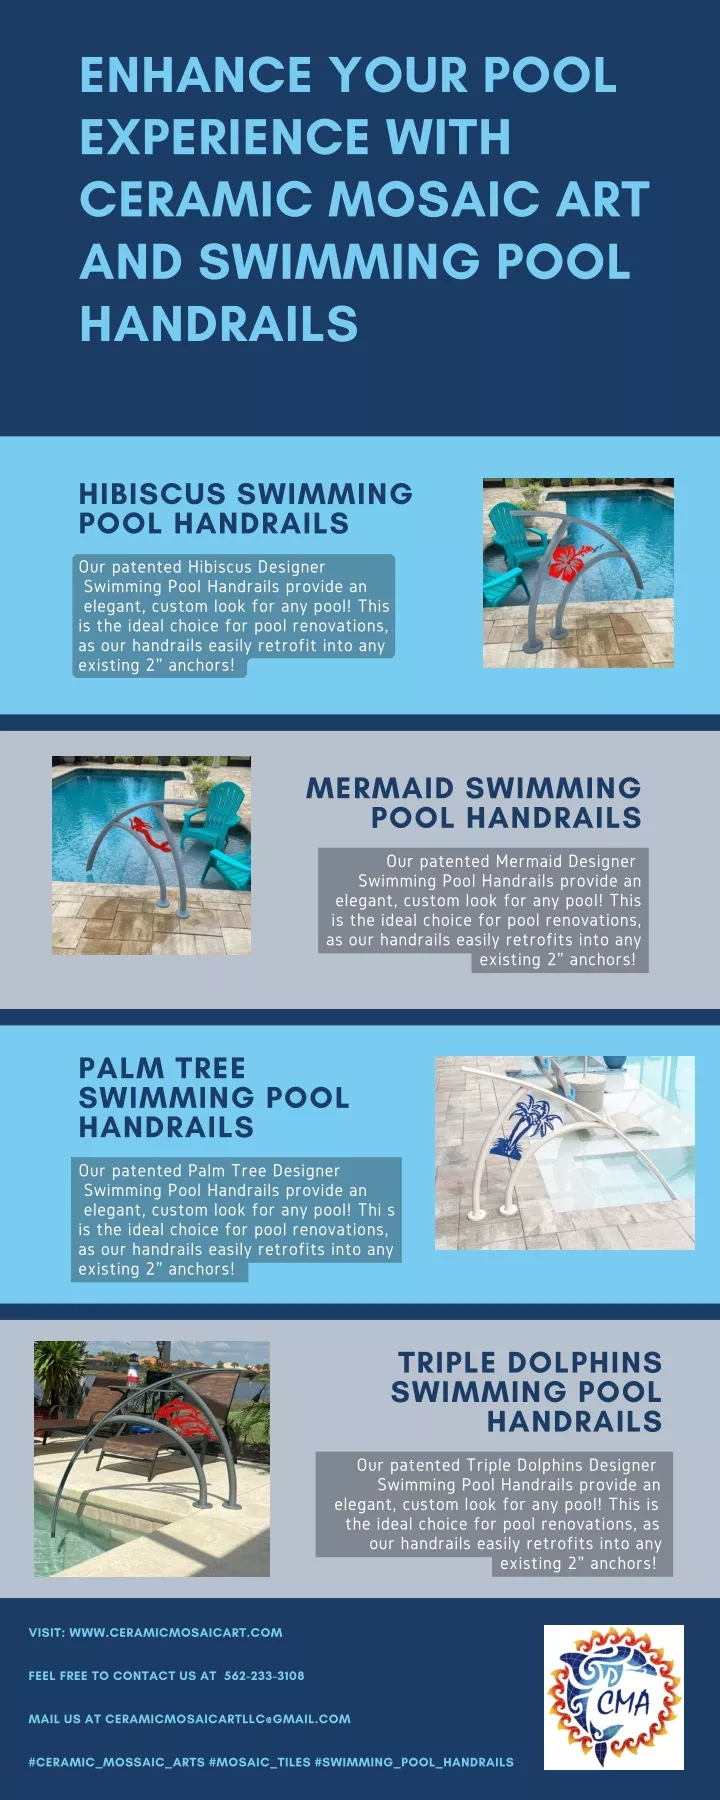 enhance your pool experience with ceramic mosaic